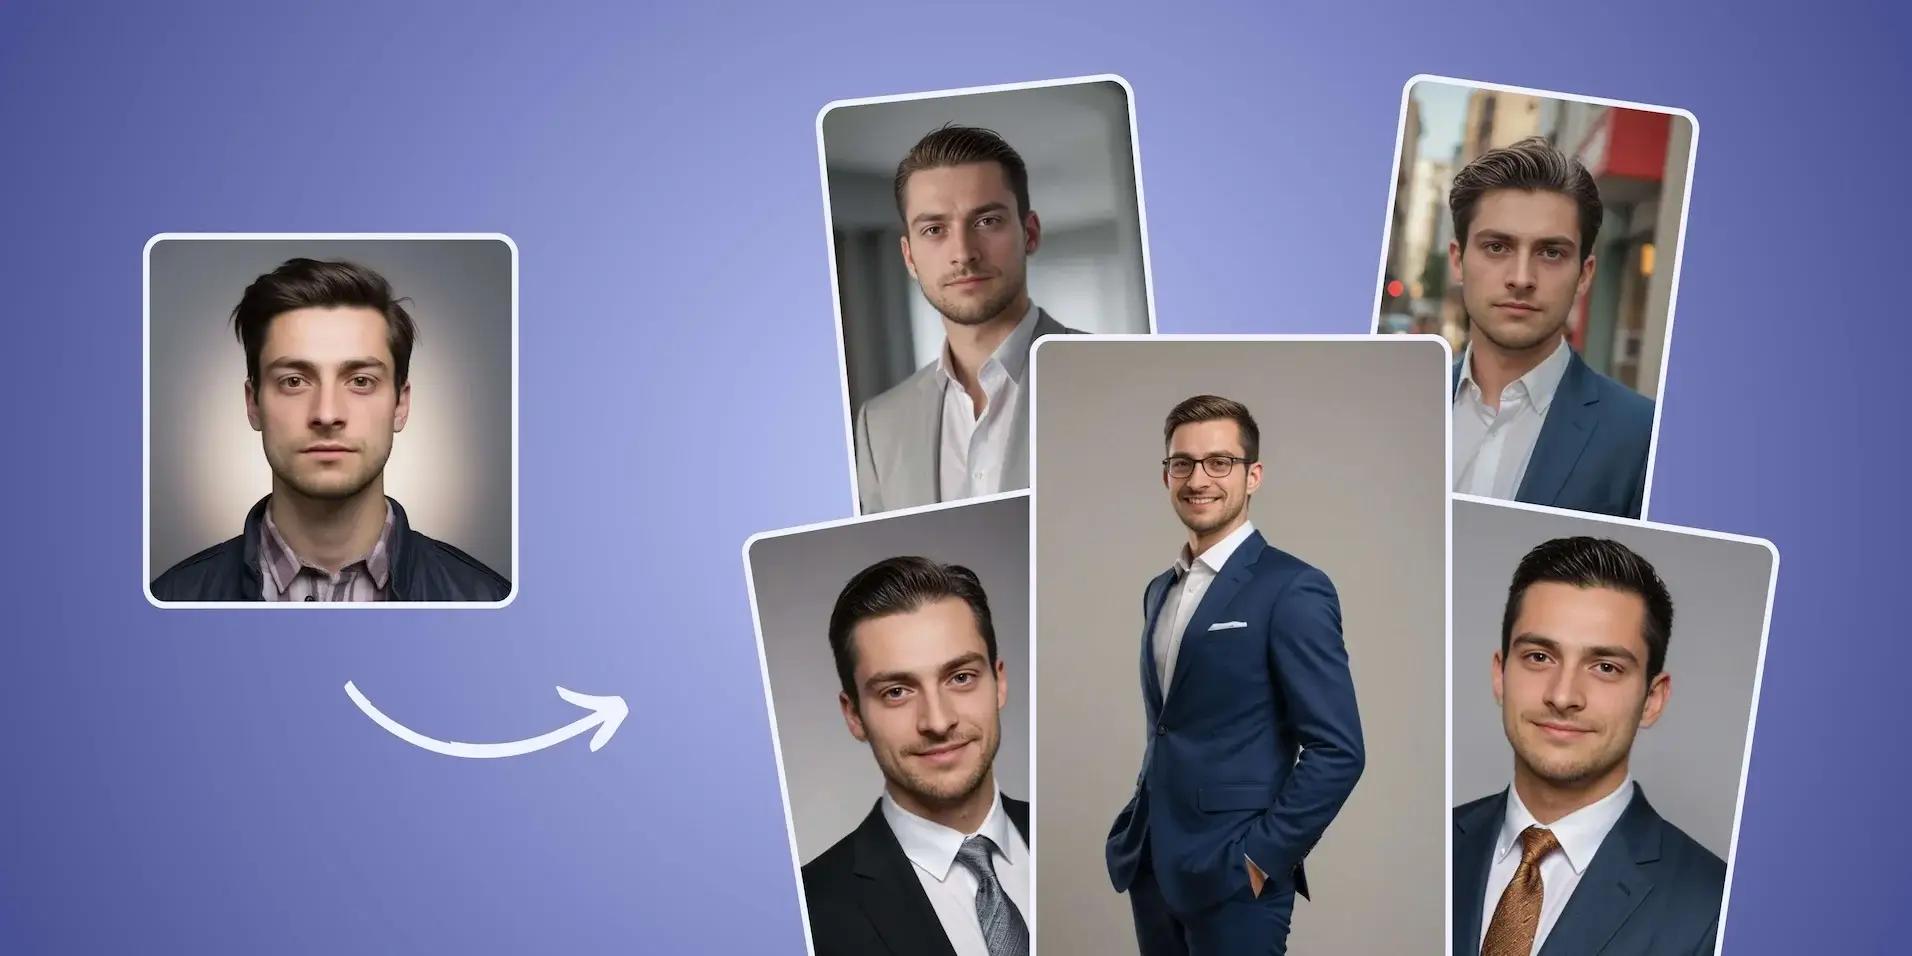 How to Capture a Professional Headshot with Your Smartphone